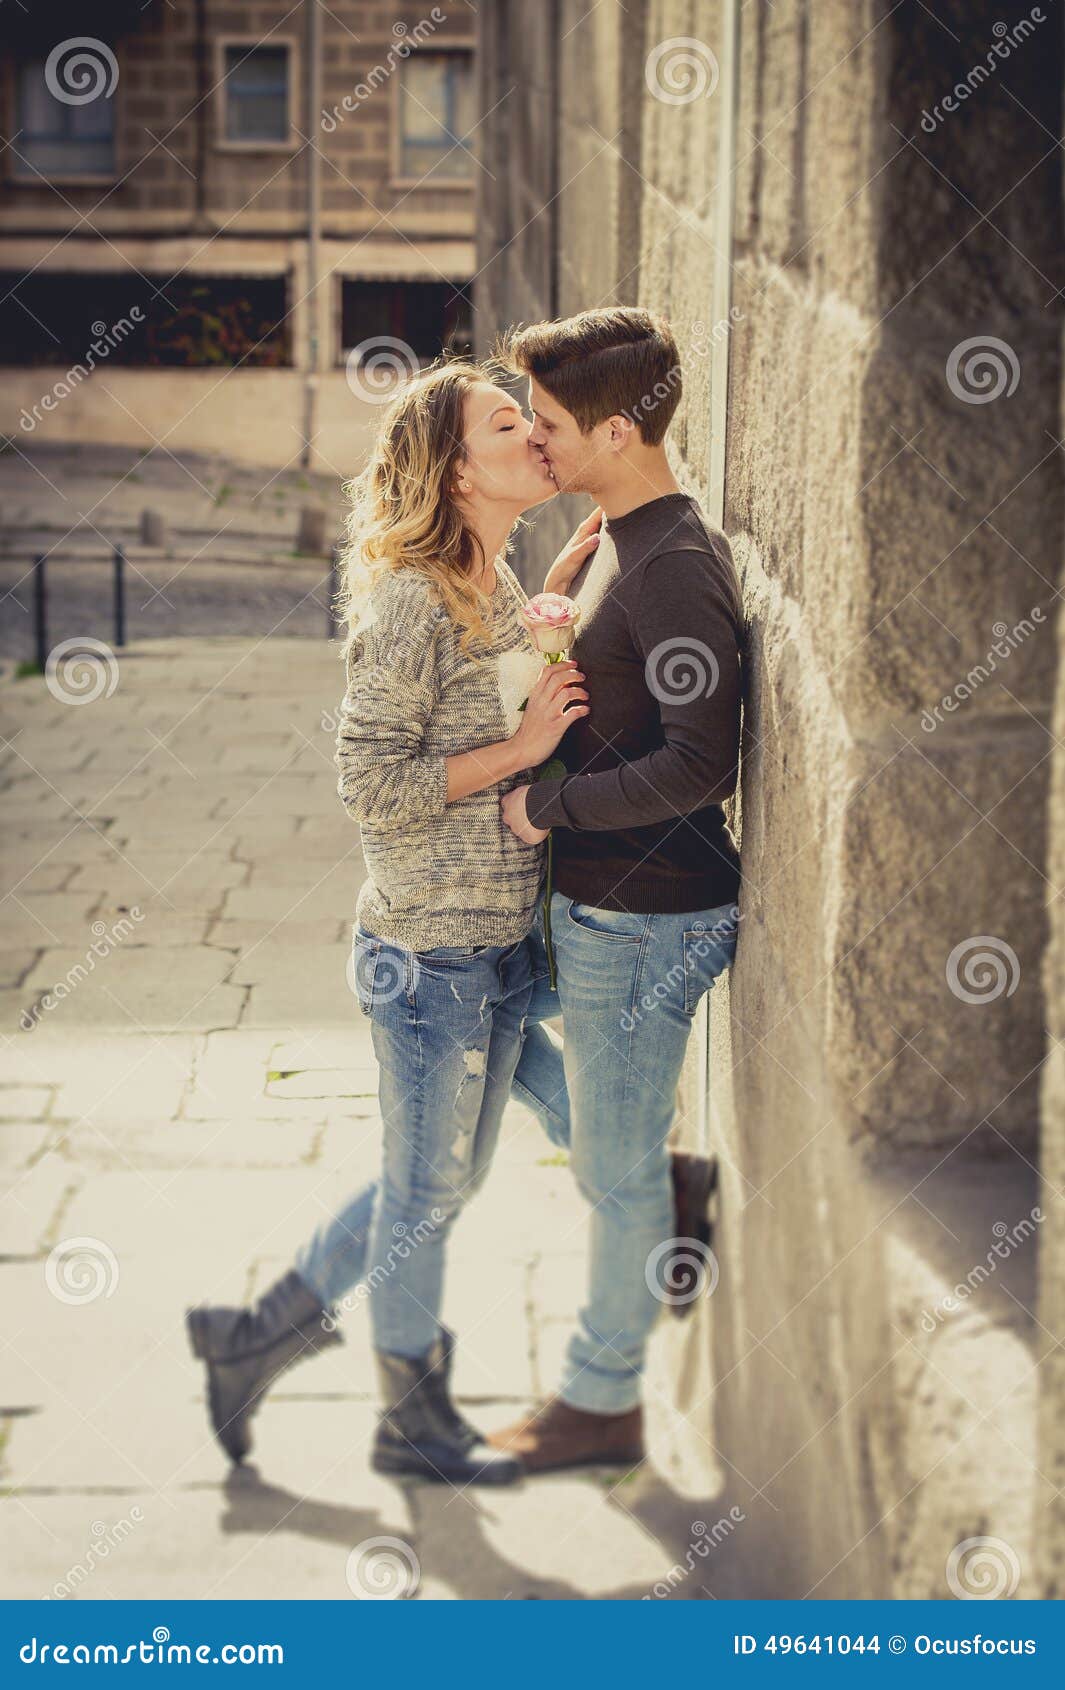 https://thumbs.dreamstime.com/z/candid-portrait-beautiful-european-couple-rose-love-kissing-street-alley-celebrating-valentines-day-passion-49641044.jpg